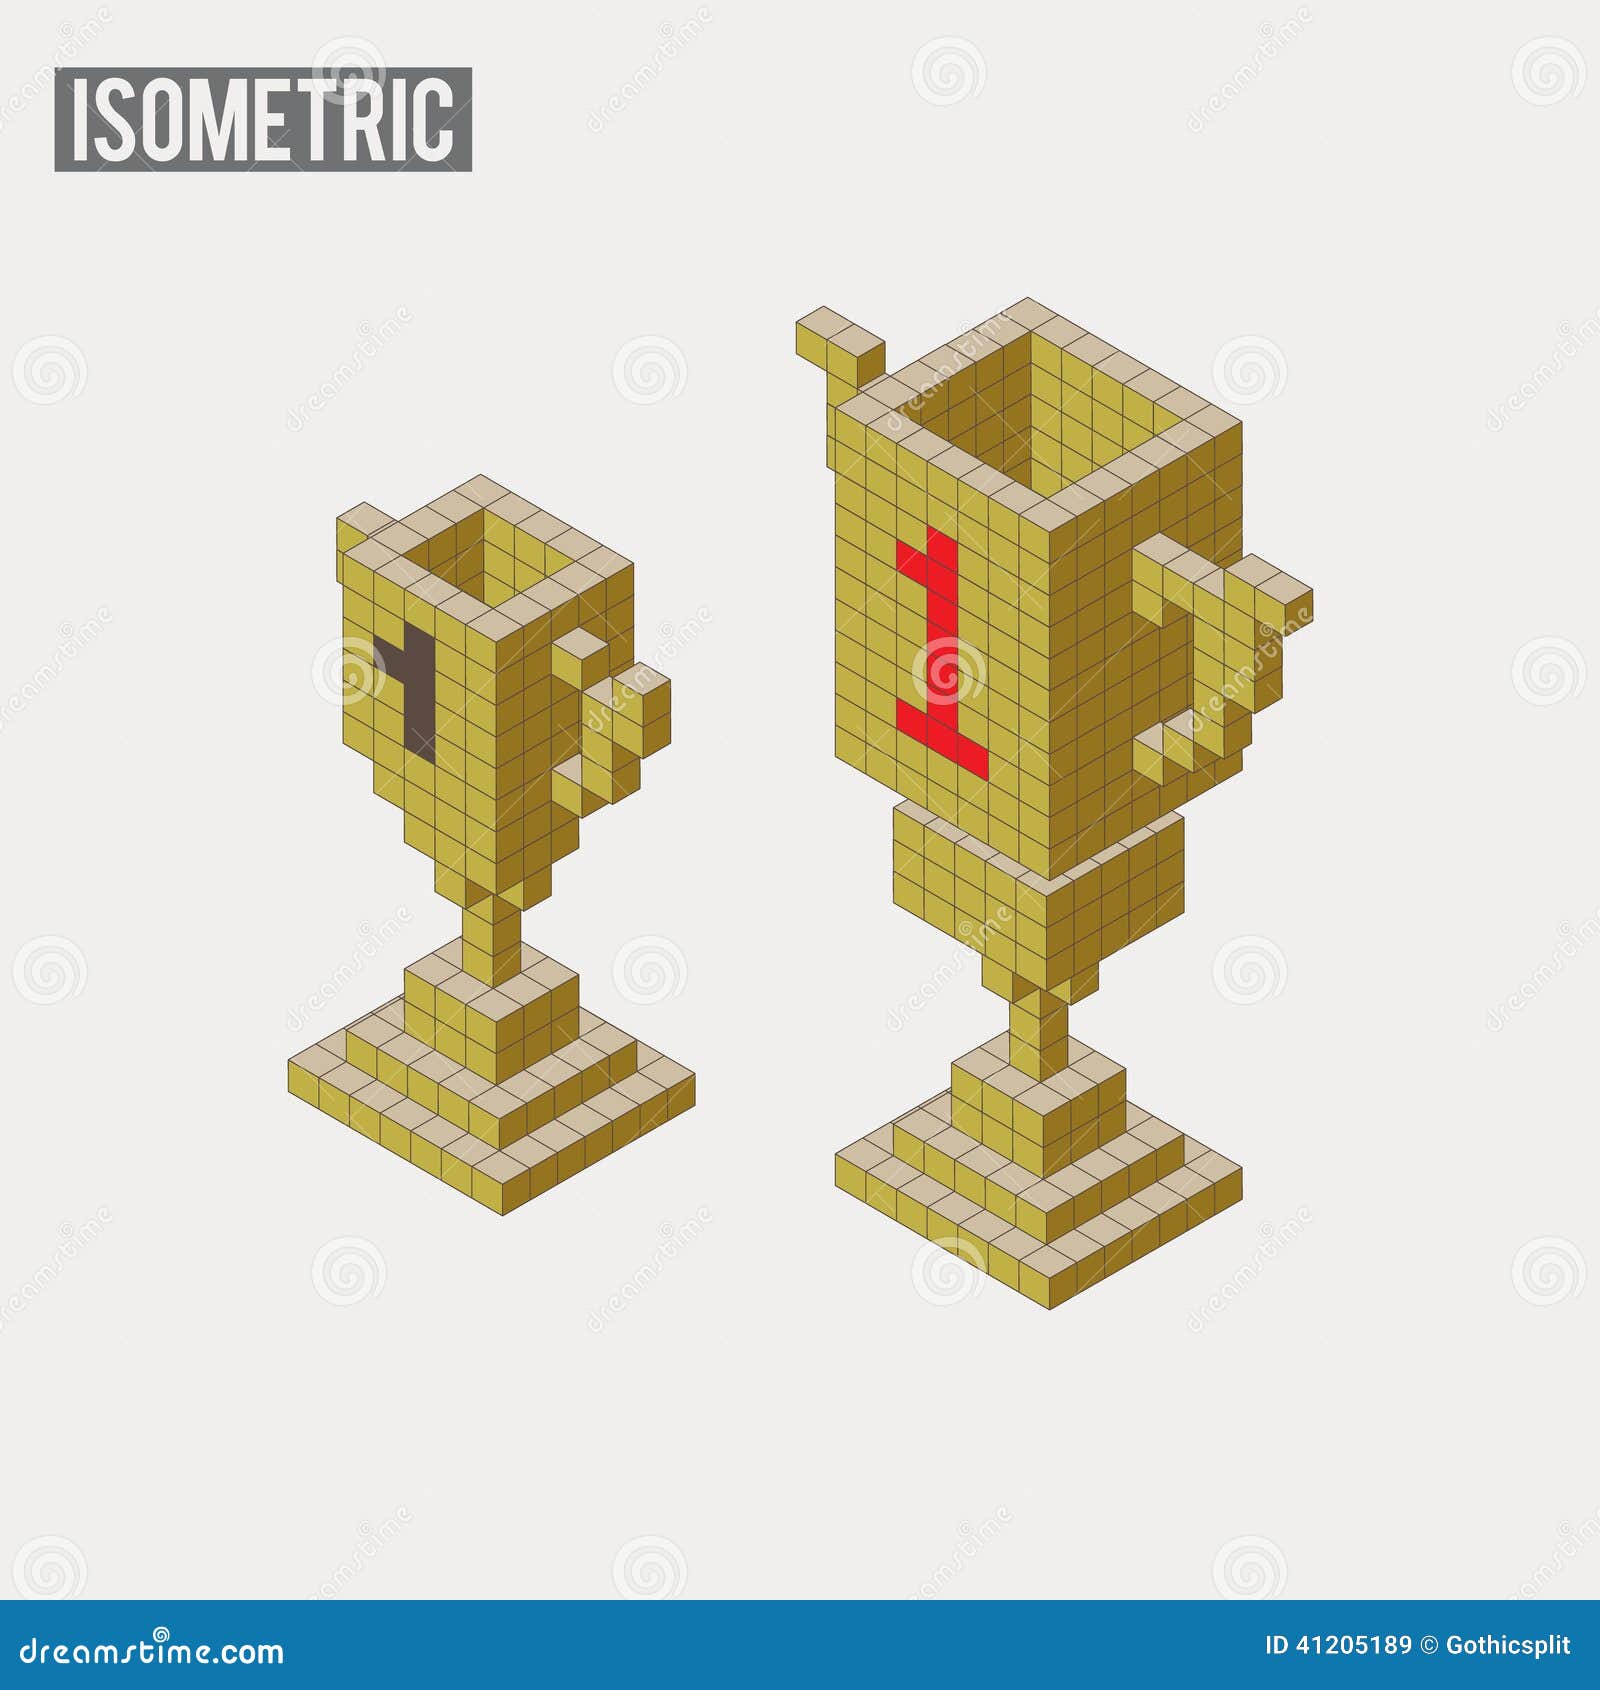 Isometric Trophy In Two Different Versions Stock Vector 